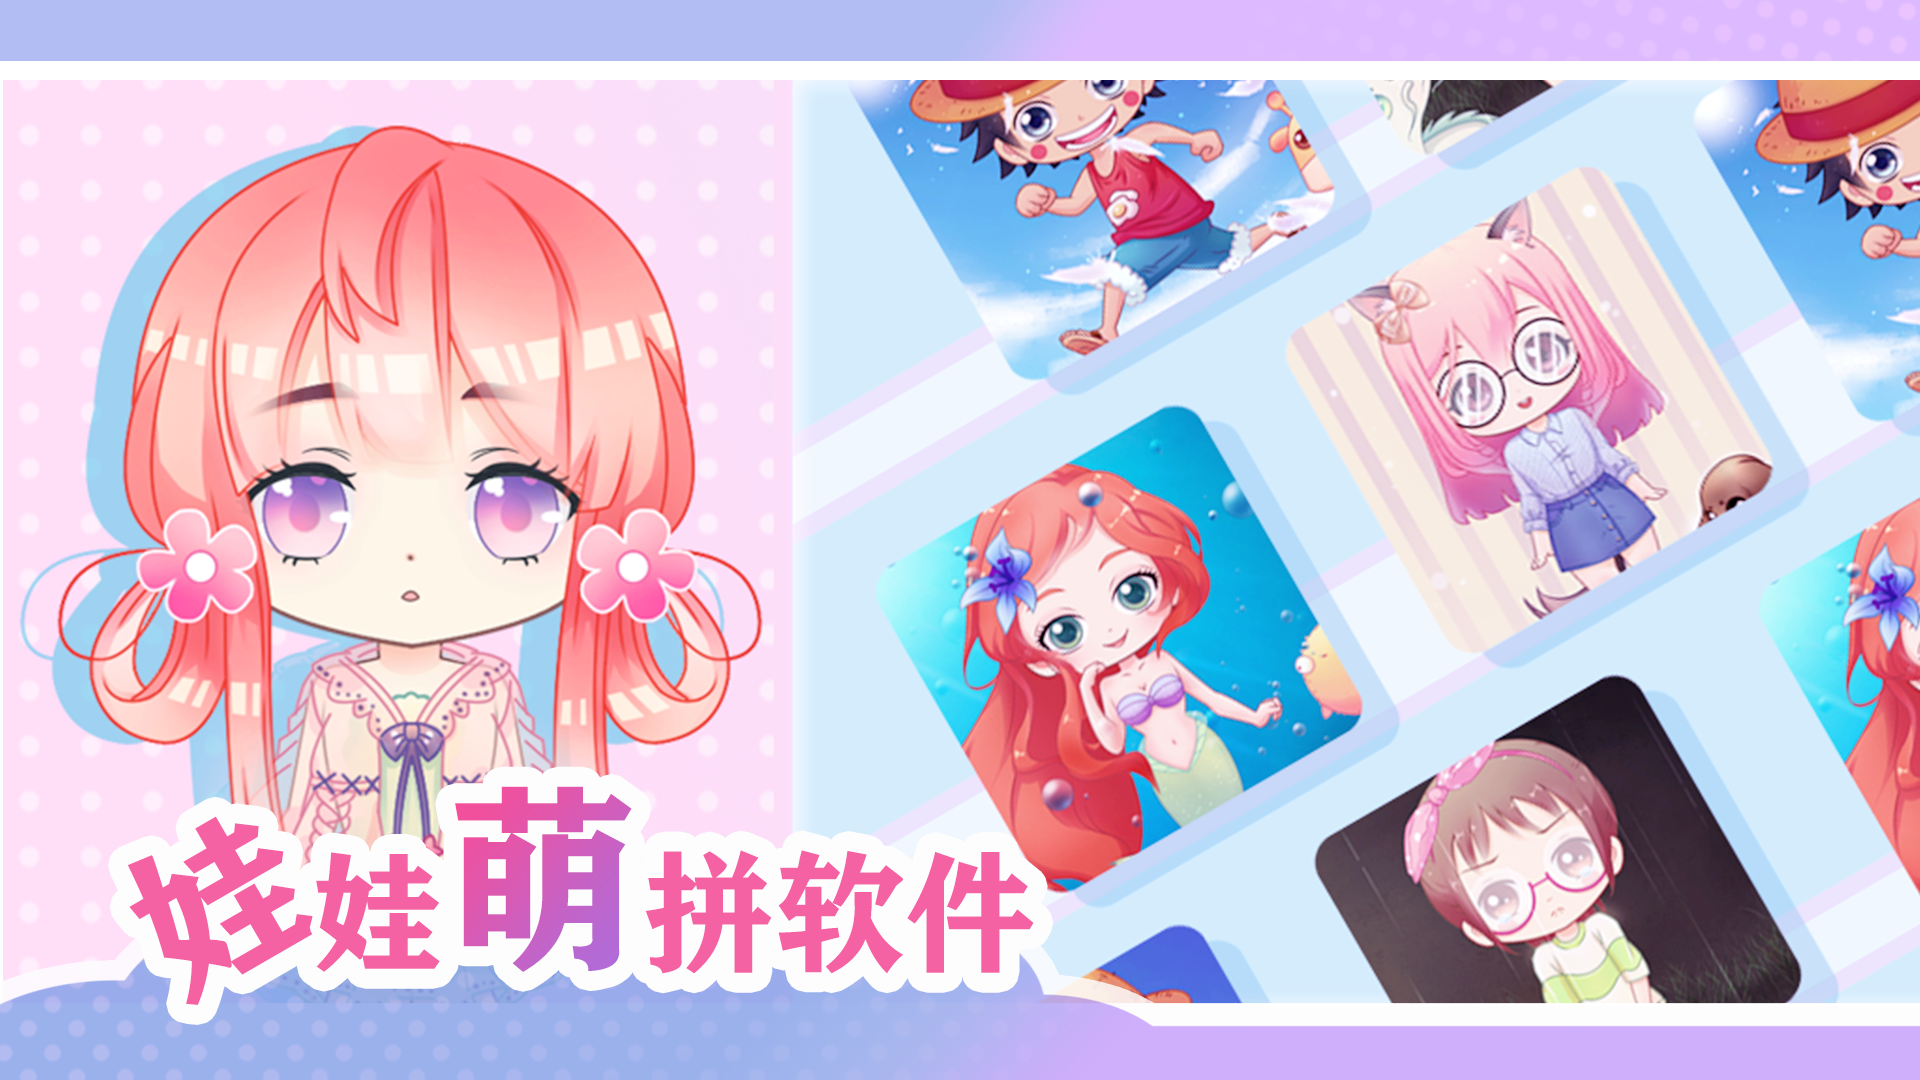 Banner of かわいい人形 